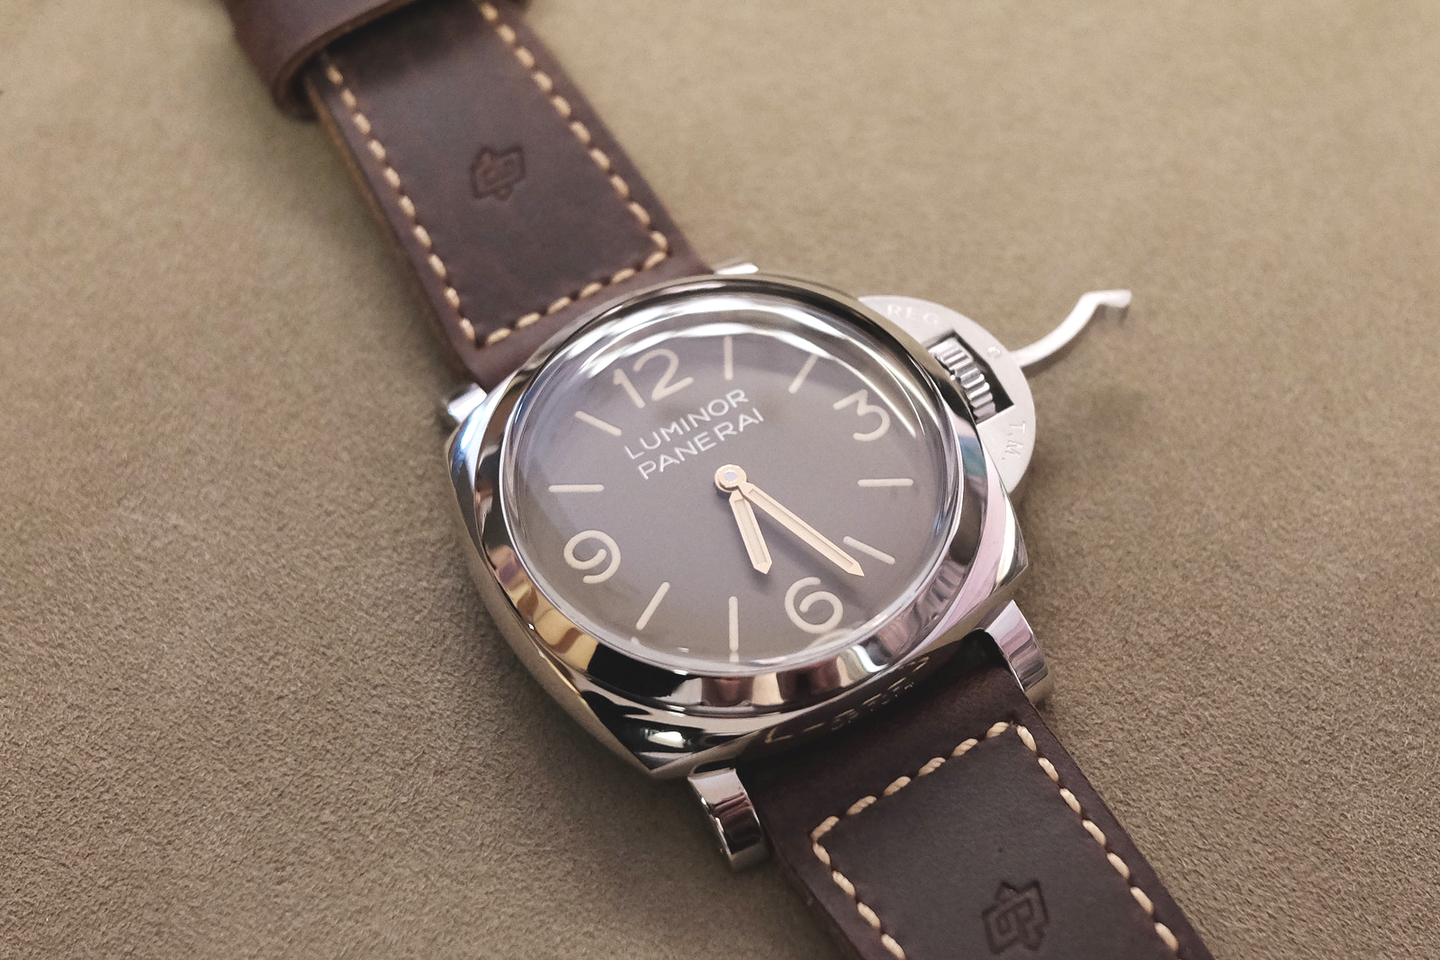 Photo Report: Panerai SIHH timepieces at Madison Ave boutique